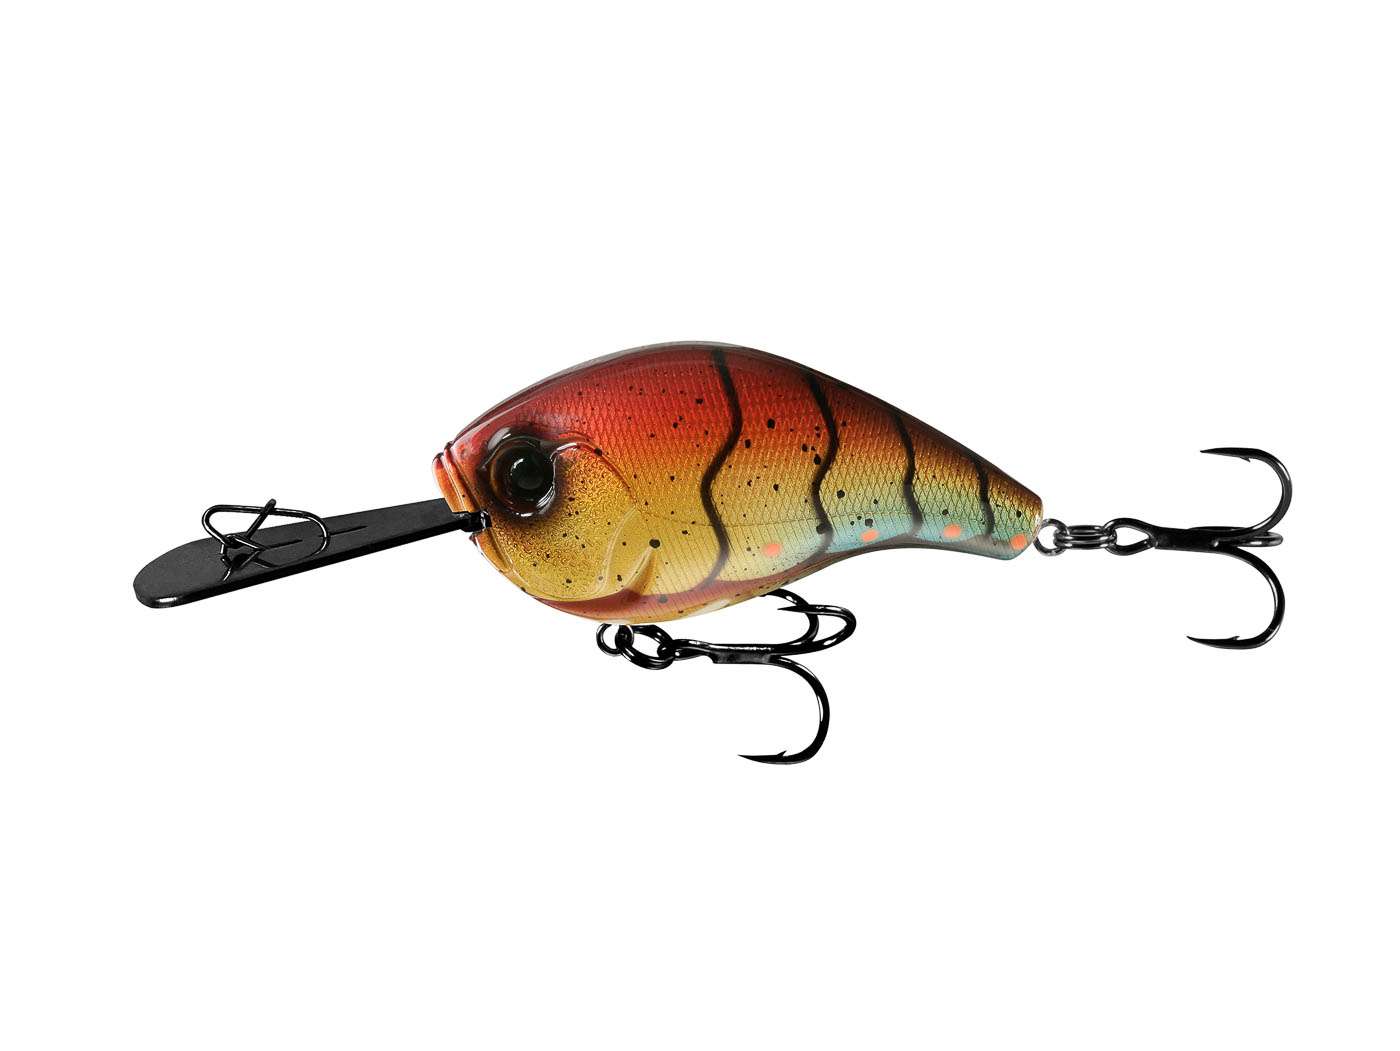 <p><strong>13 Fishing Jabber Jaw Deep</strong></p><p>The Jabber Jaw Deep is the newest addition to 13 Fishingâs deep-water lineup of crankbaits. The chattering bill is rigged inside the full metal jowls, which resonate as it bangs from side to side. Thereâs no need to upgrade the hooks. The JJ Deep is finished off with VMC black nickel hooks. $12.99. <a href=